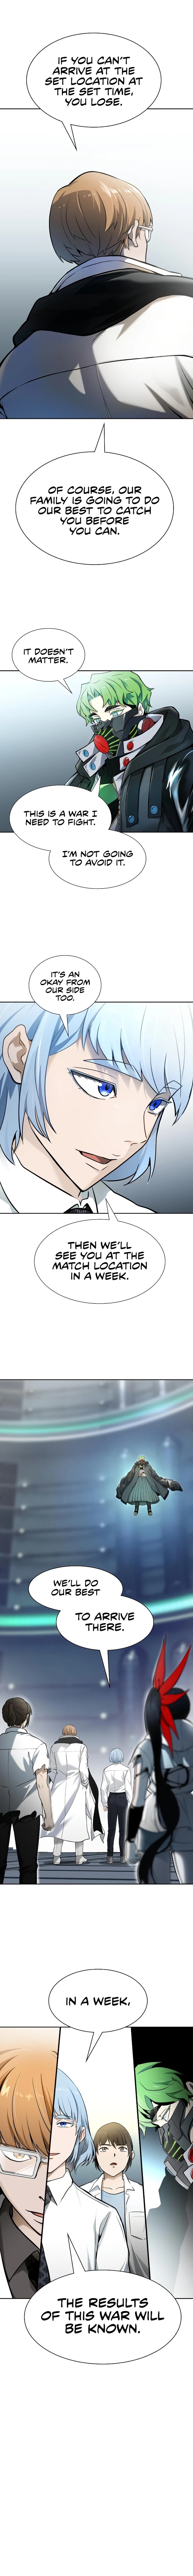 Tower Of God Chapter 575 Page 18